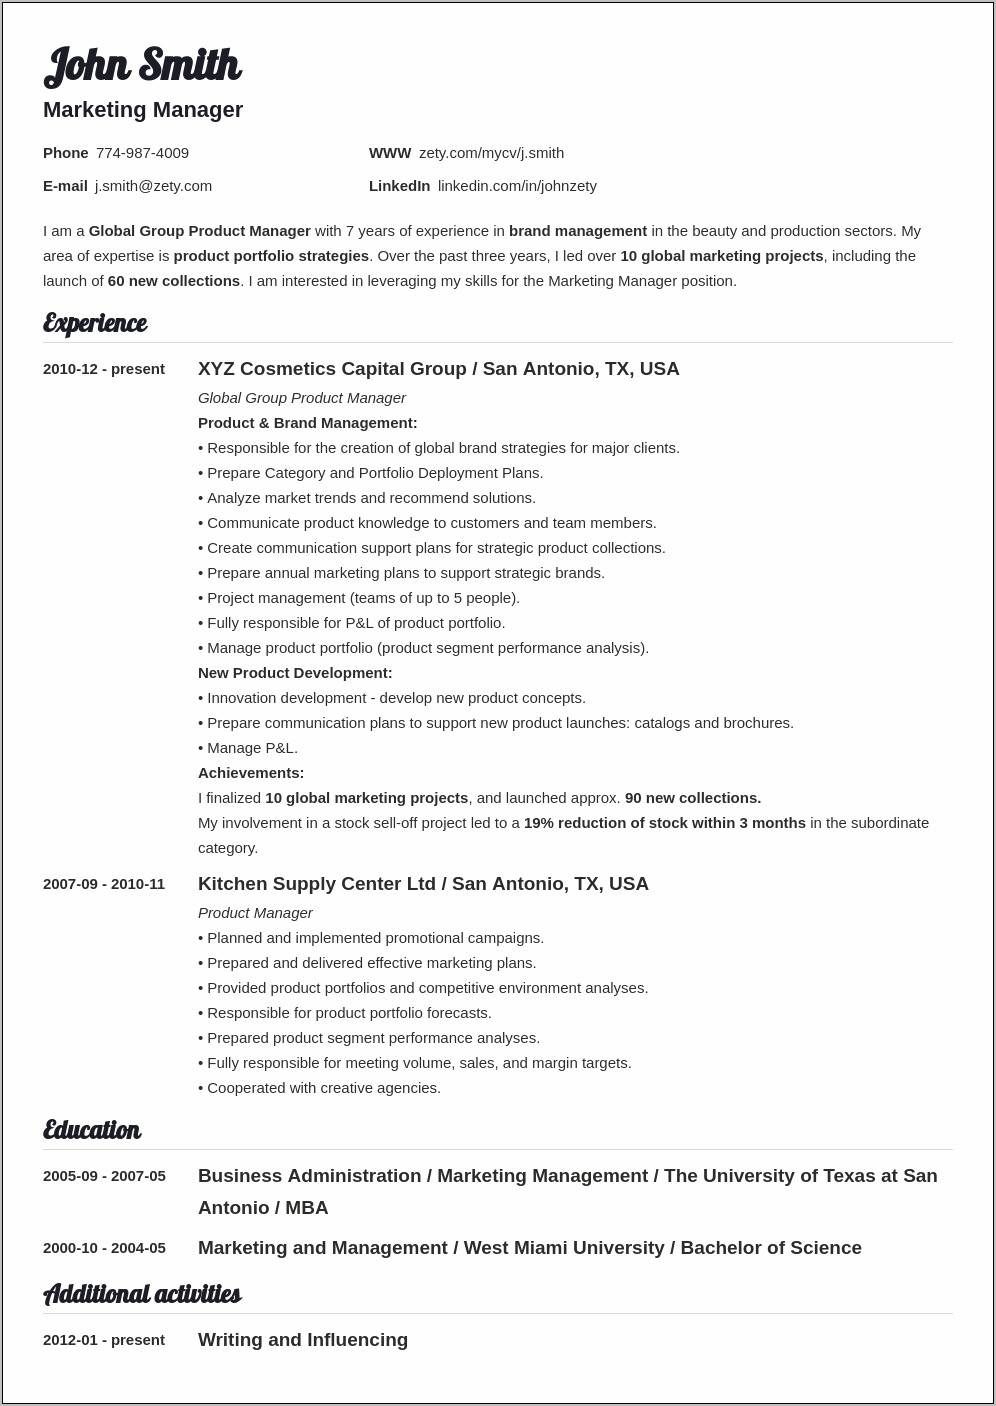 Resume Examples For Blue Collar Jobs Resume Example Gallery